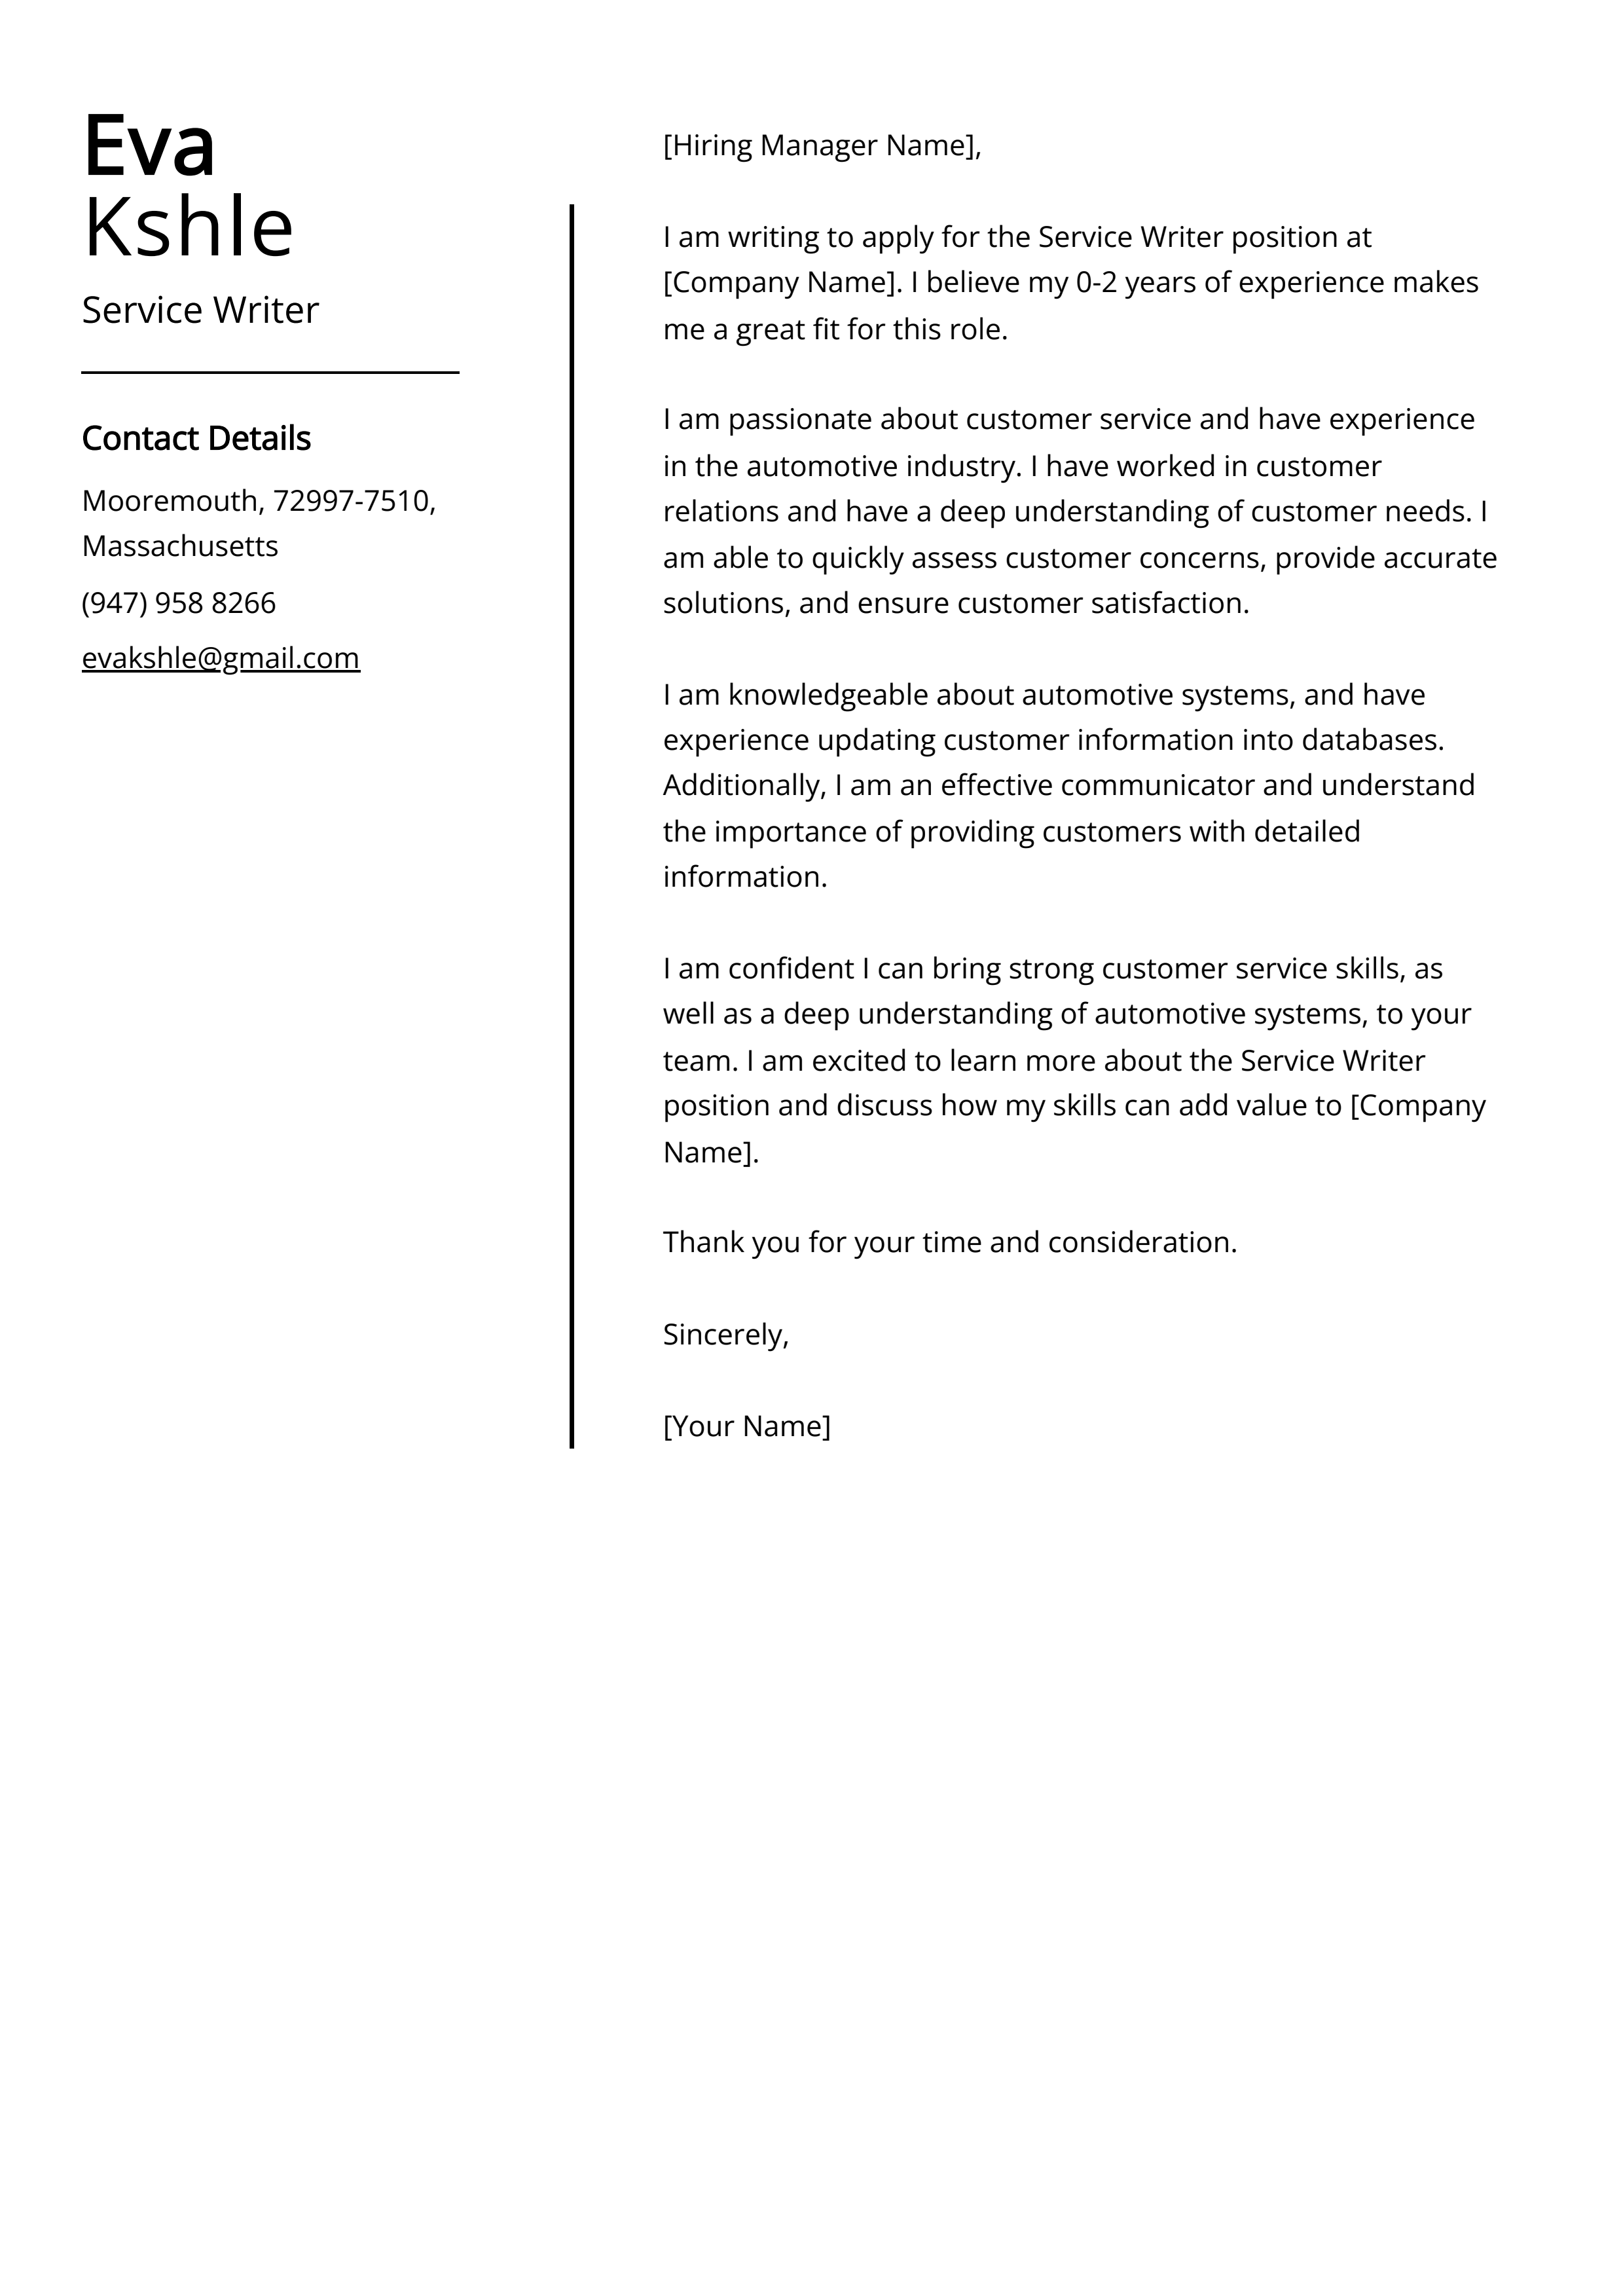 Service Writer Cover Letter Example